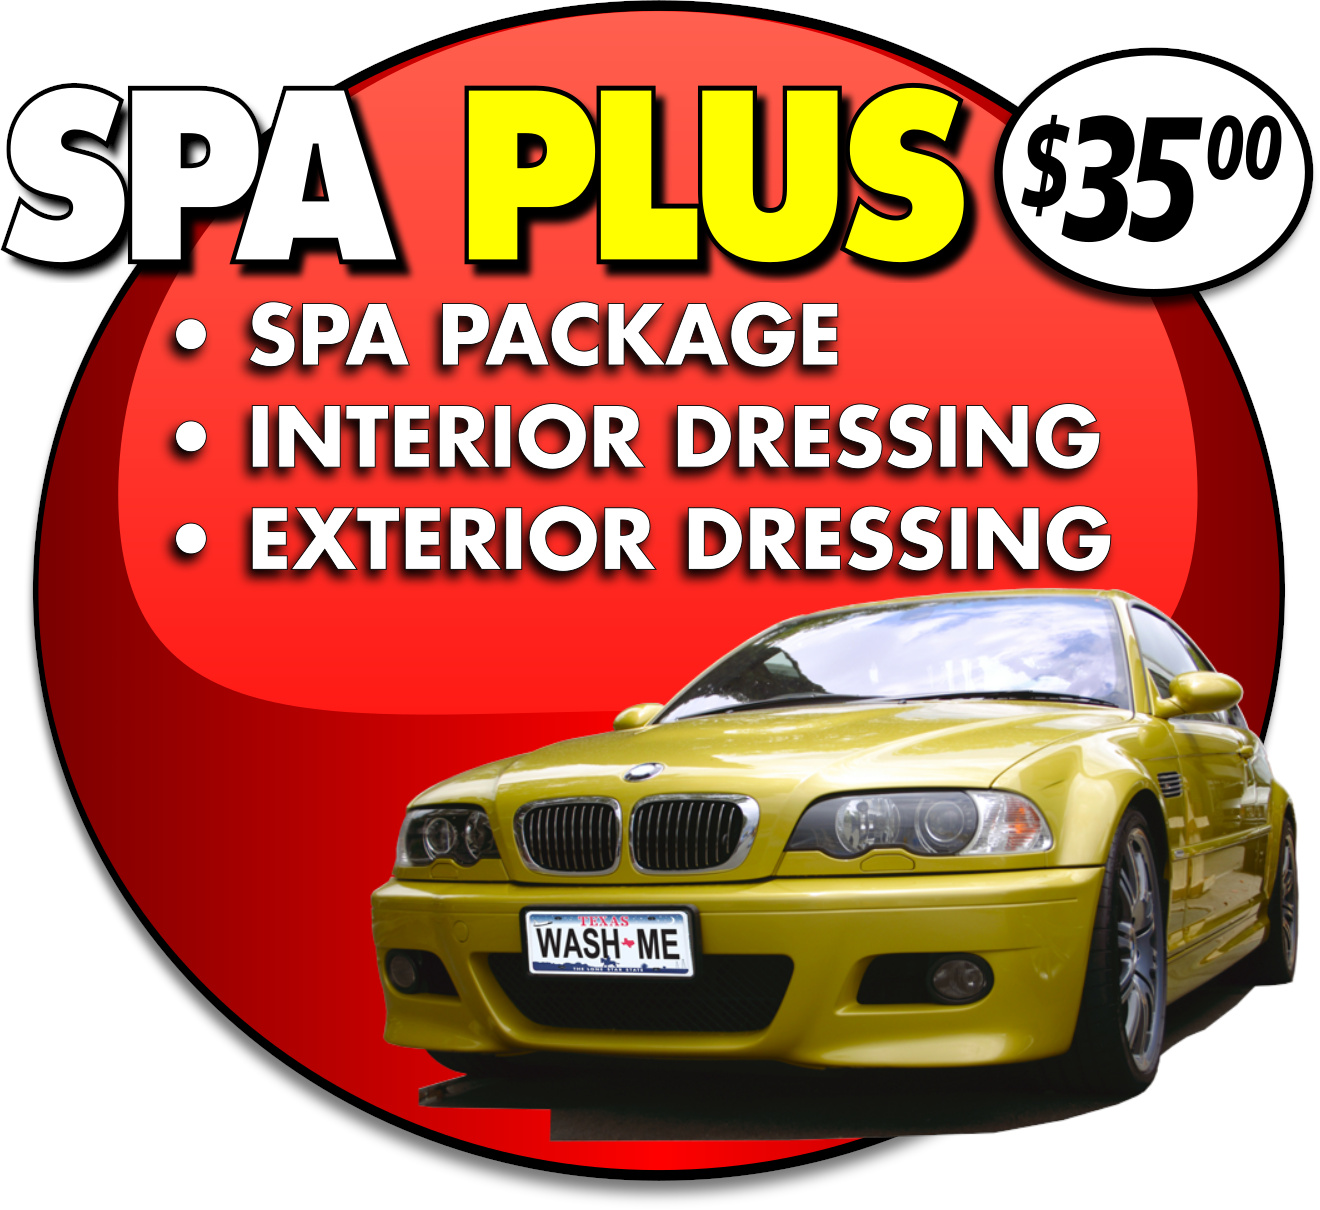 Spa Plus Package at $33.95